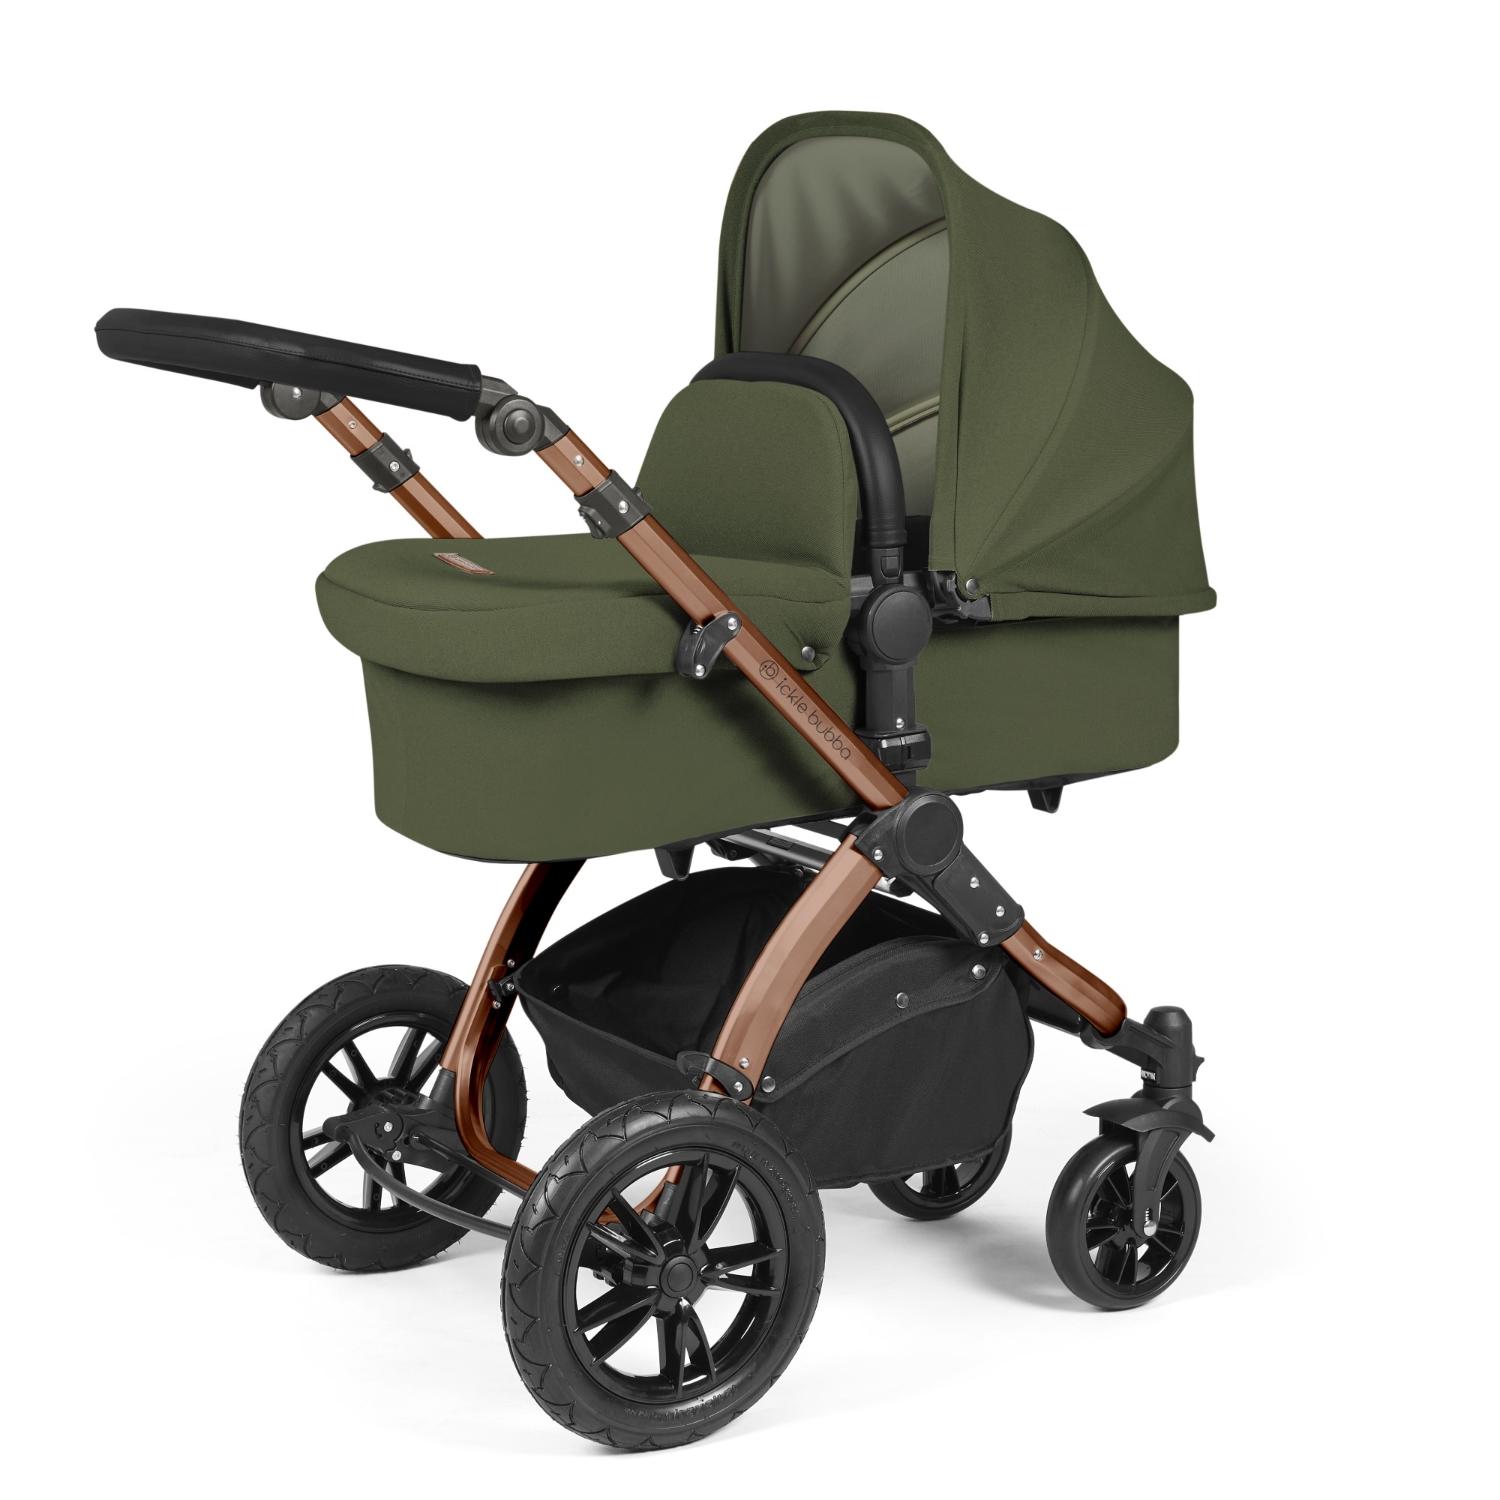 Ickle Bubba Stomp Luxe Pushchair with carrycot attached in Woodland green colour with bronze chassis